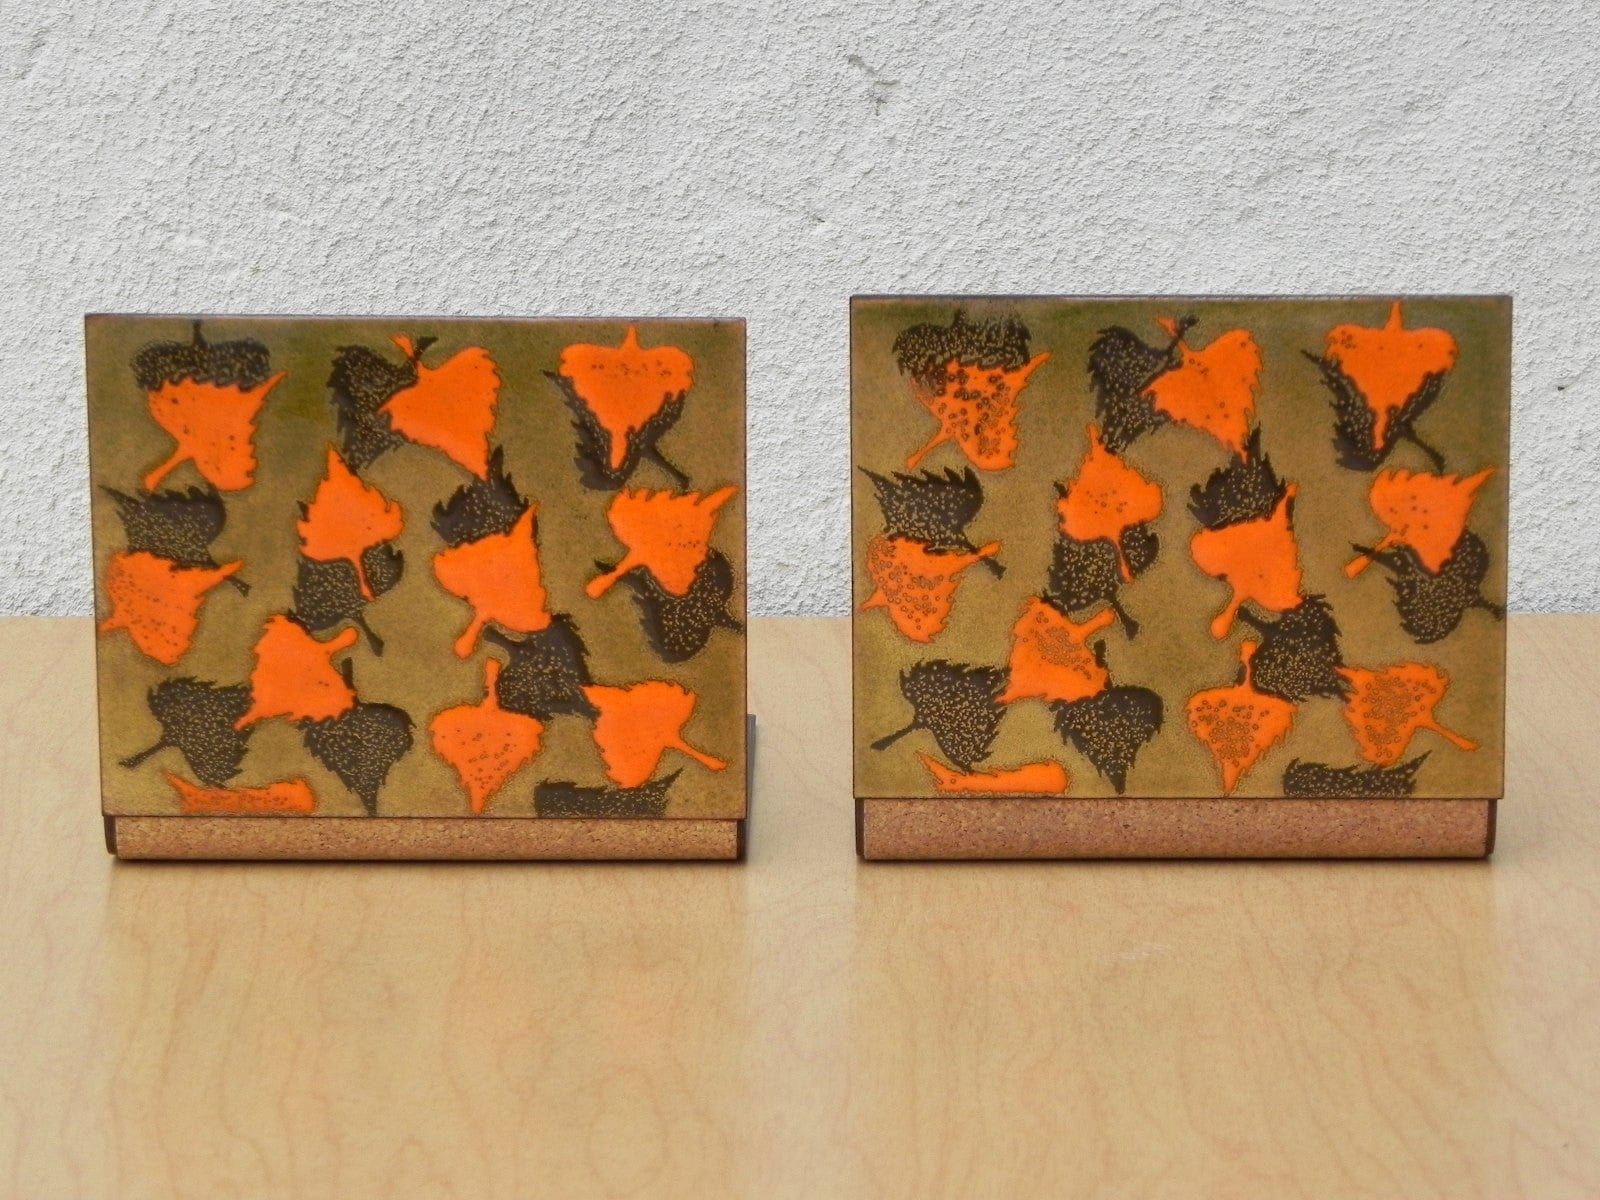 I Like Mike's Mid Century Modern Accessories Modern Orange Brown Gold Enameled Copper Bookends